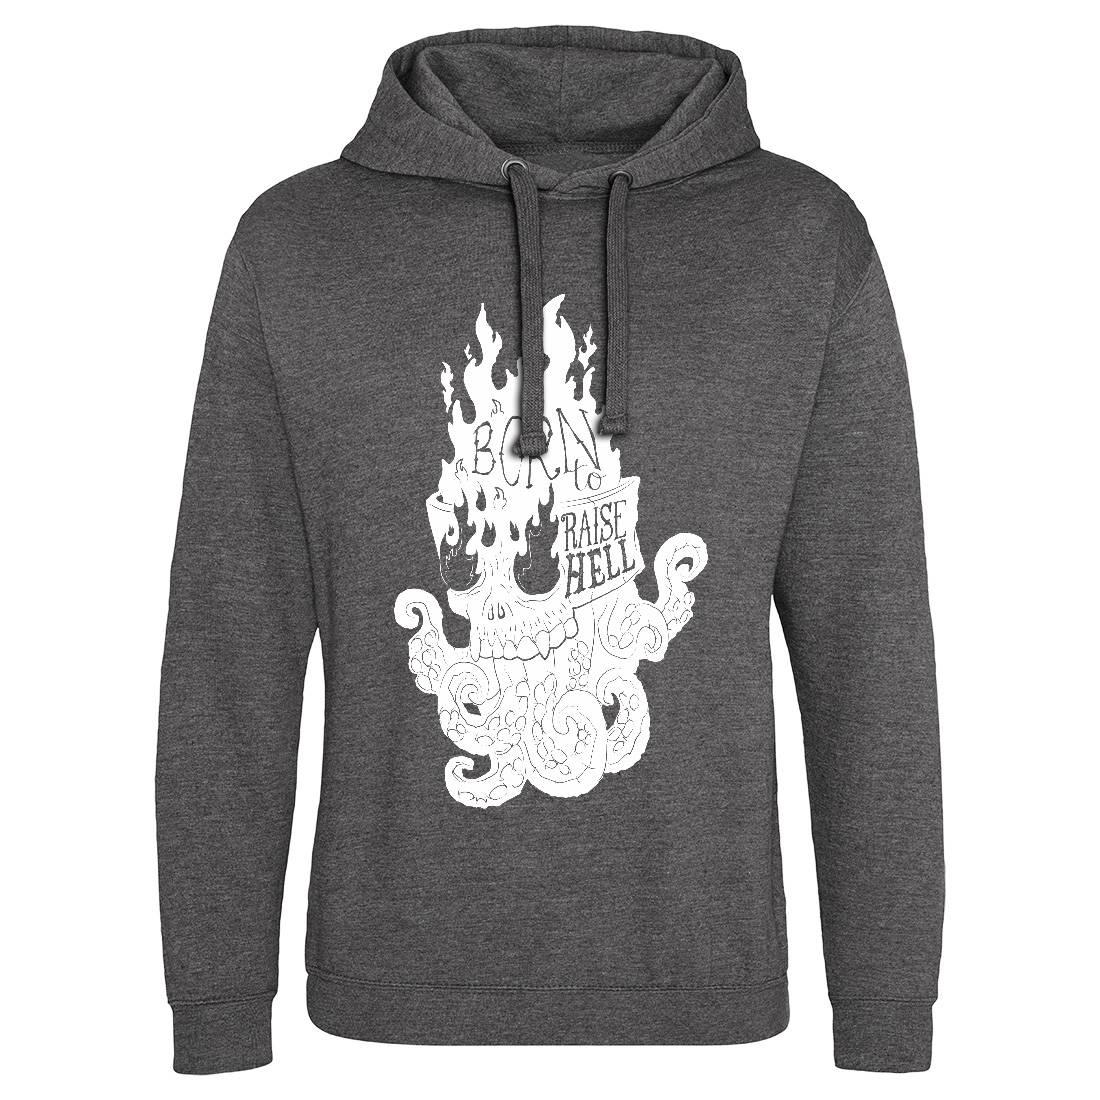 Raise Hell Mens Hoodie Without Pocket Motorcycles A960